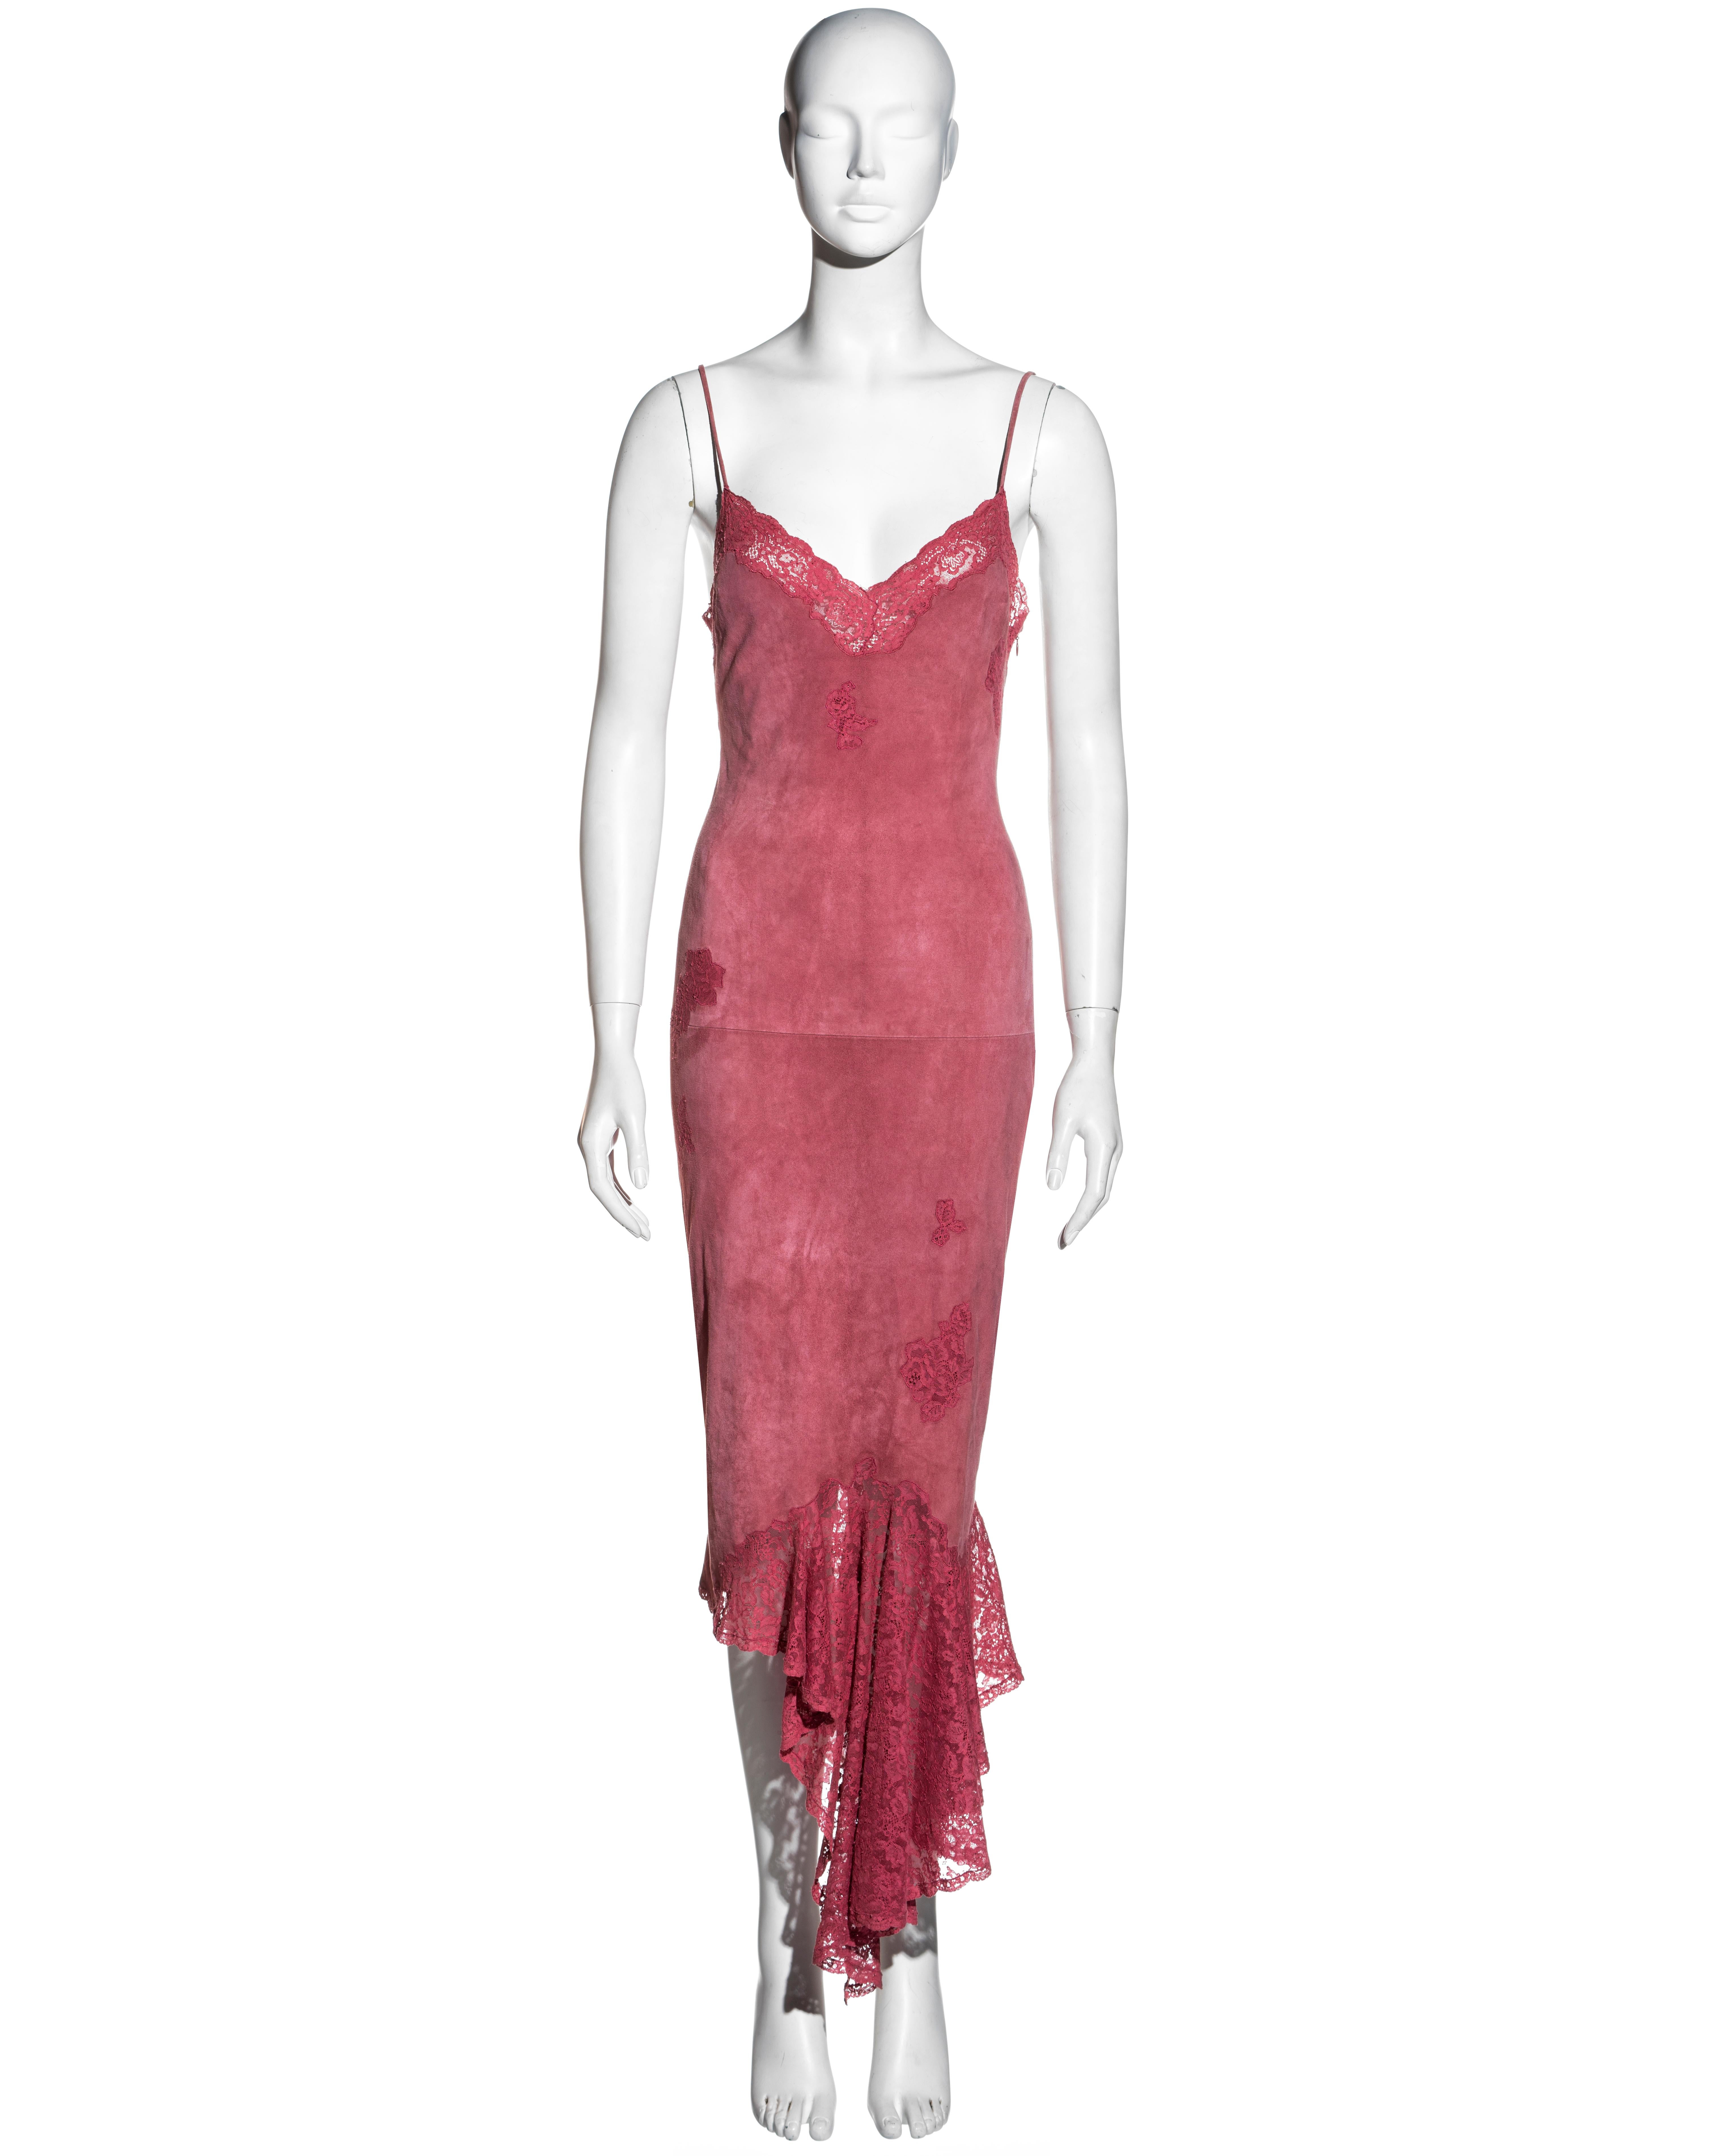 ▪ Christian Dior pink suede and lace slip dress
▪ Designed by John Galliano
▪ Calais lace inserts, skirt, and trim 
▪ Spaghetti straps 
▪ Silk lining
▪ Handkerchief hemline 
▪ FR 40 - UK 12 - US 8
▪ Leather: 100% Velvet Goat  Lace: 90% Cotton, 10%